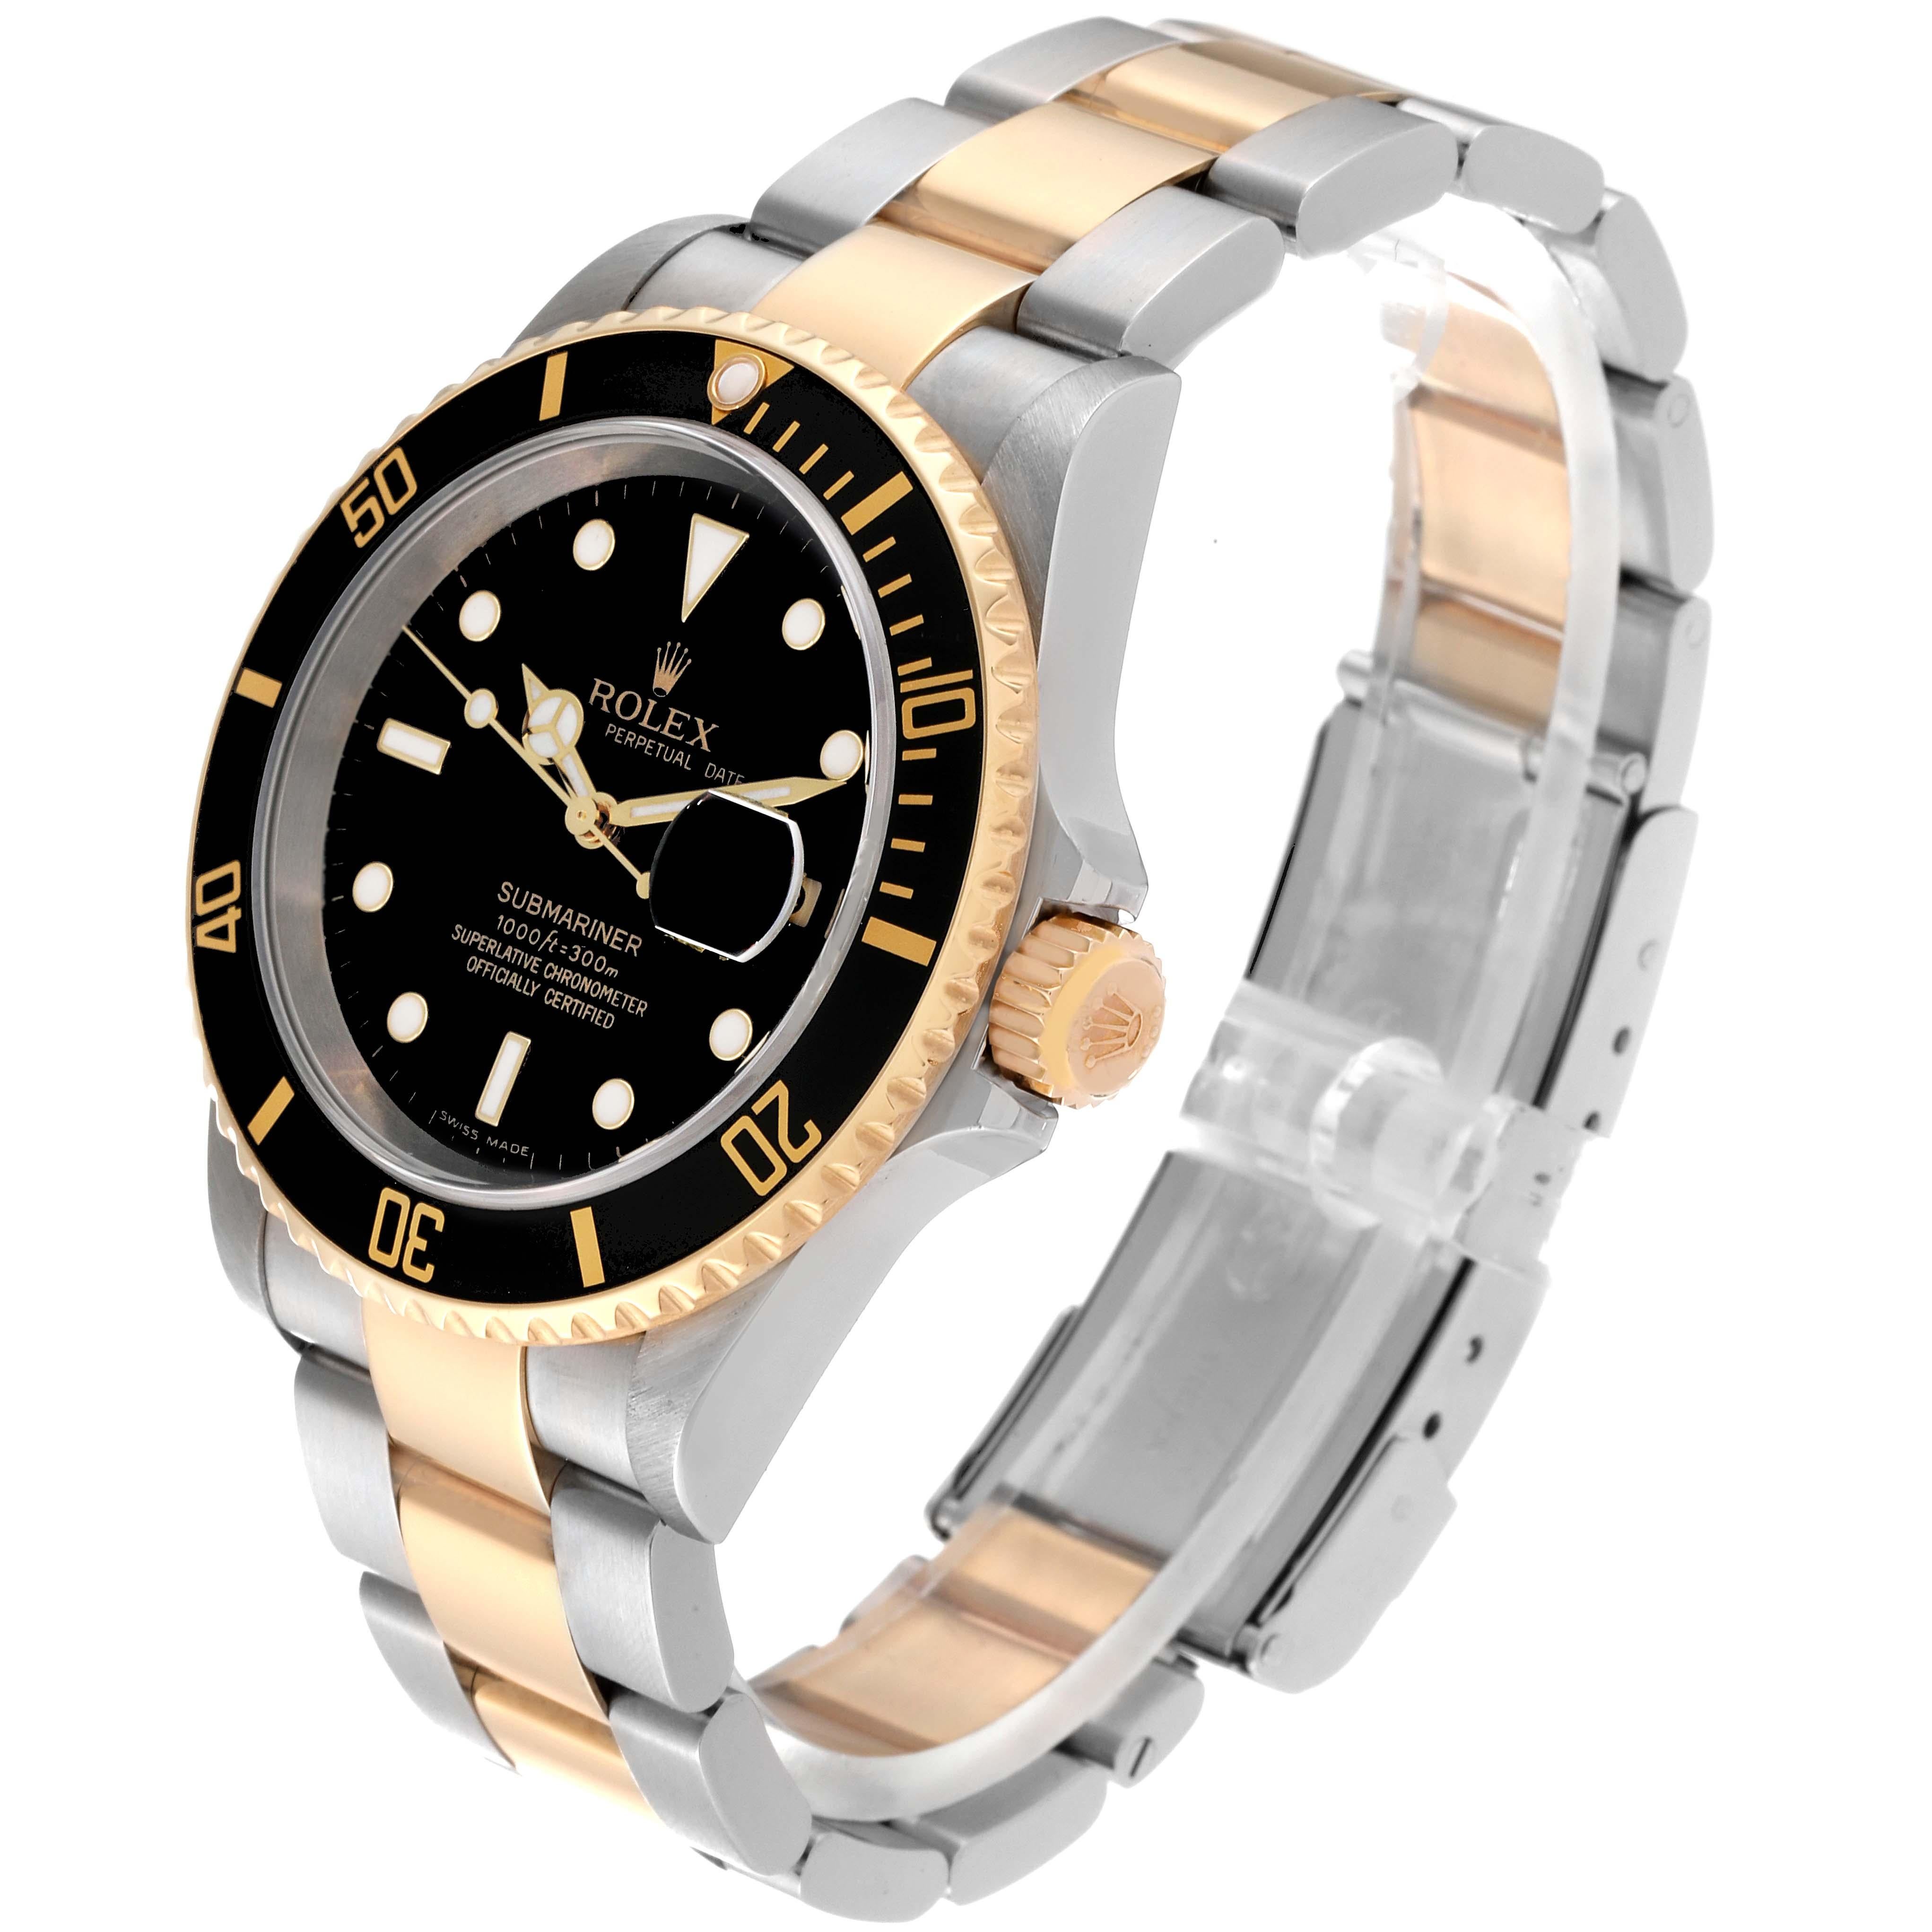 Rolex Submariner Steel Yellow Gold Black Dial Mens Watch 16613 Box Papers 6